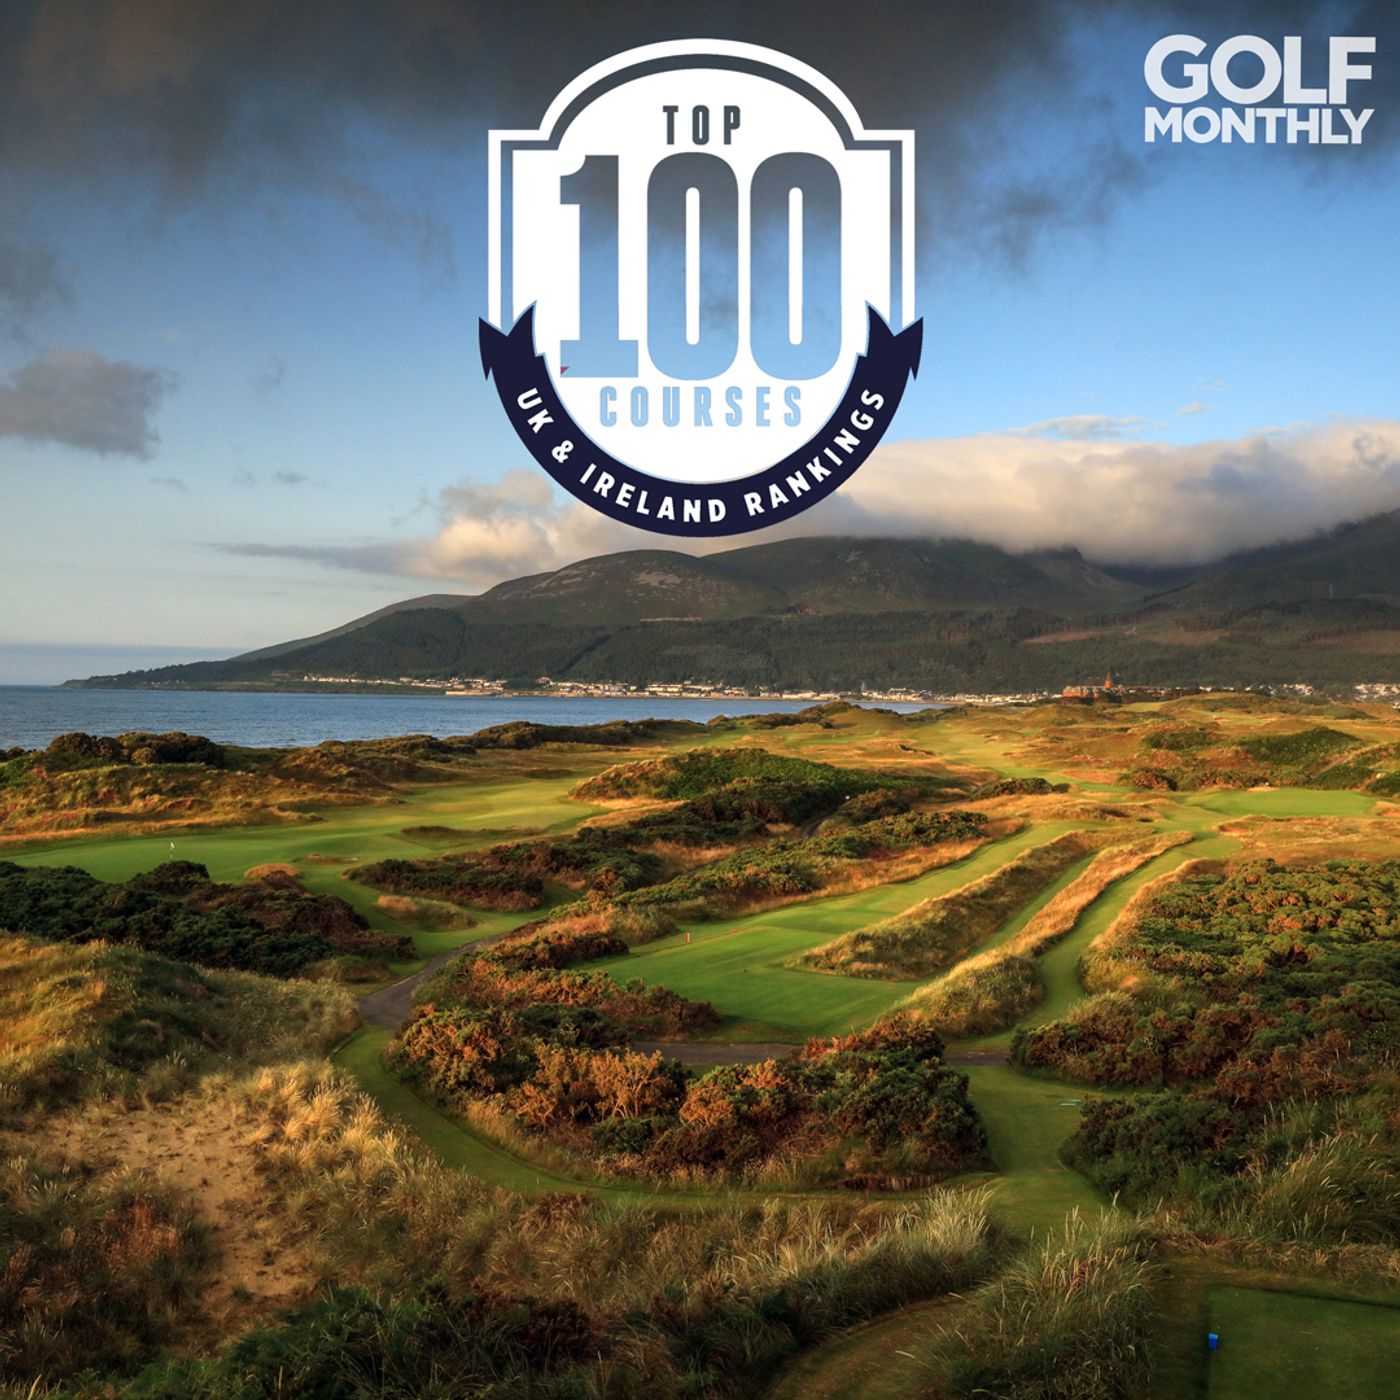 UK and Ireland’s Top 100 Golf Courses